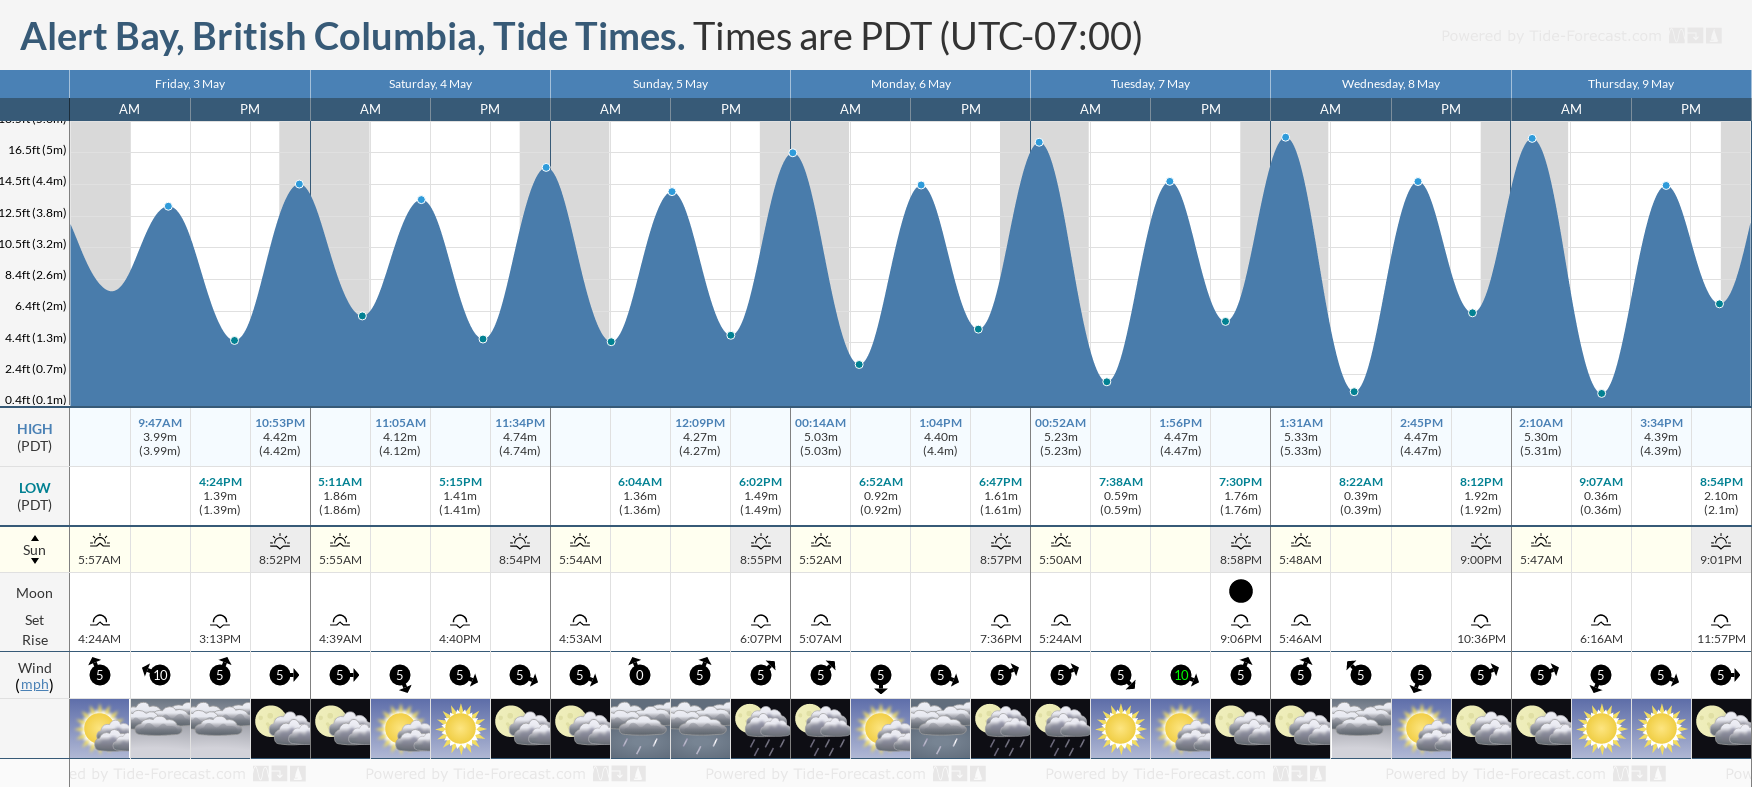 Alert Bay, British Columbia Tide Chart including high and low tide tide times for the next 7 days